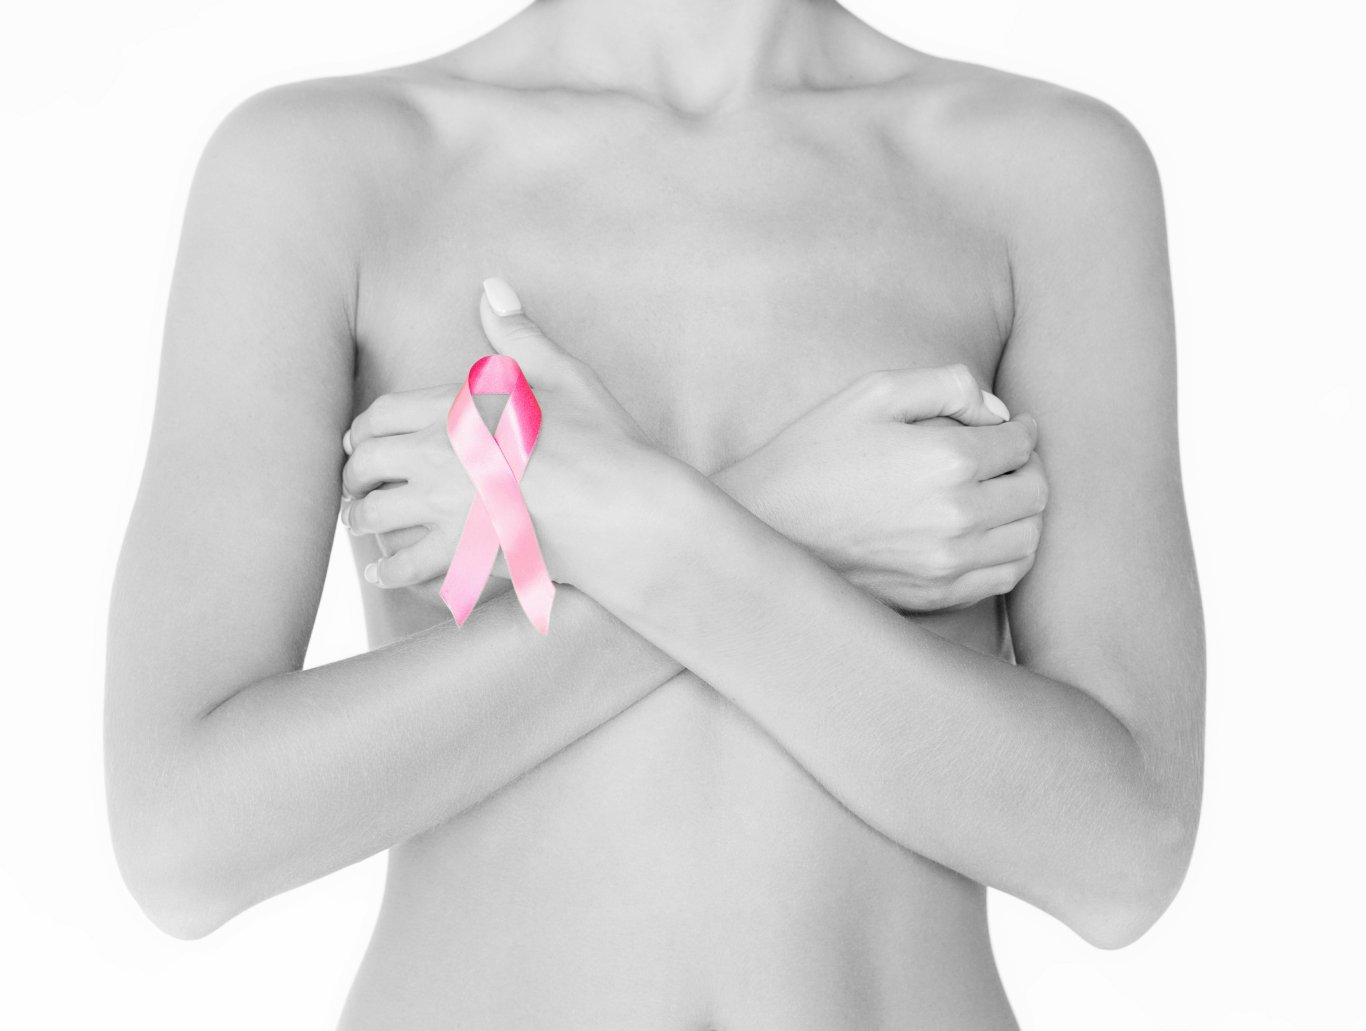 Breast Reconstruction Awareness Day - BRA Day